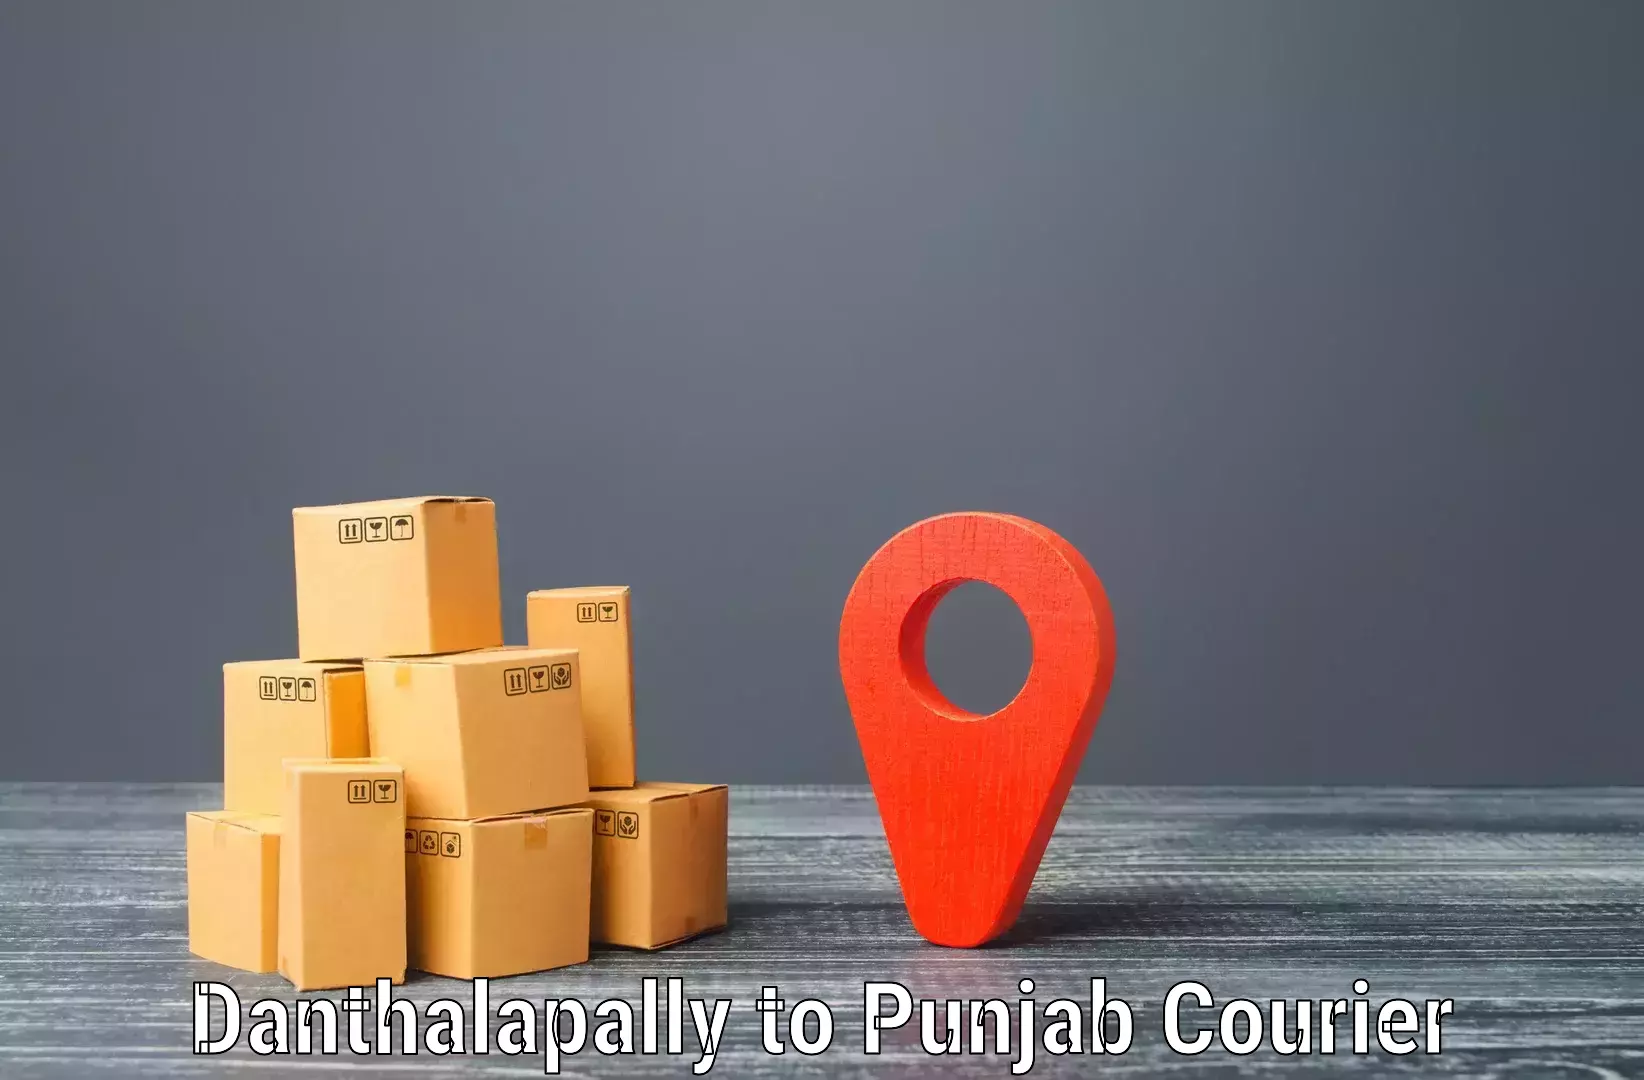 State-of-the-art courier technology in Danthalapally to Jalandhar